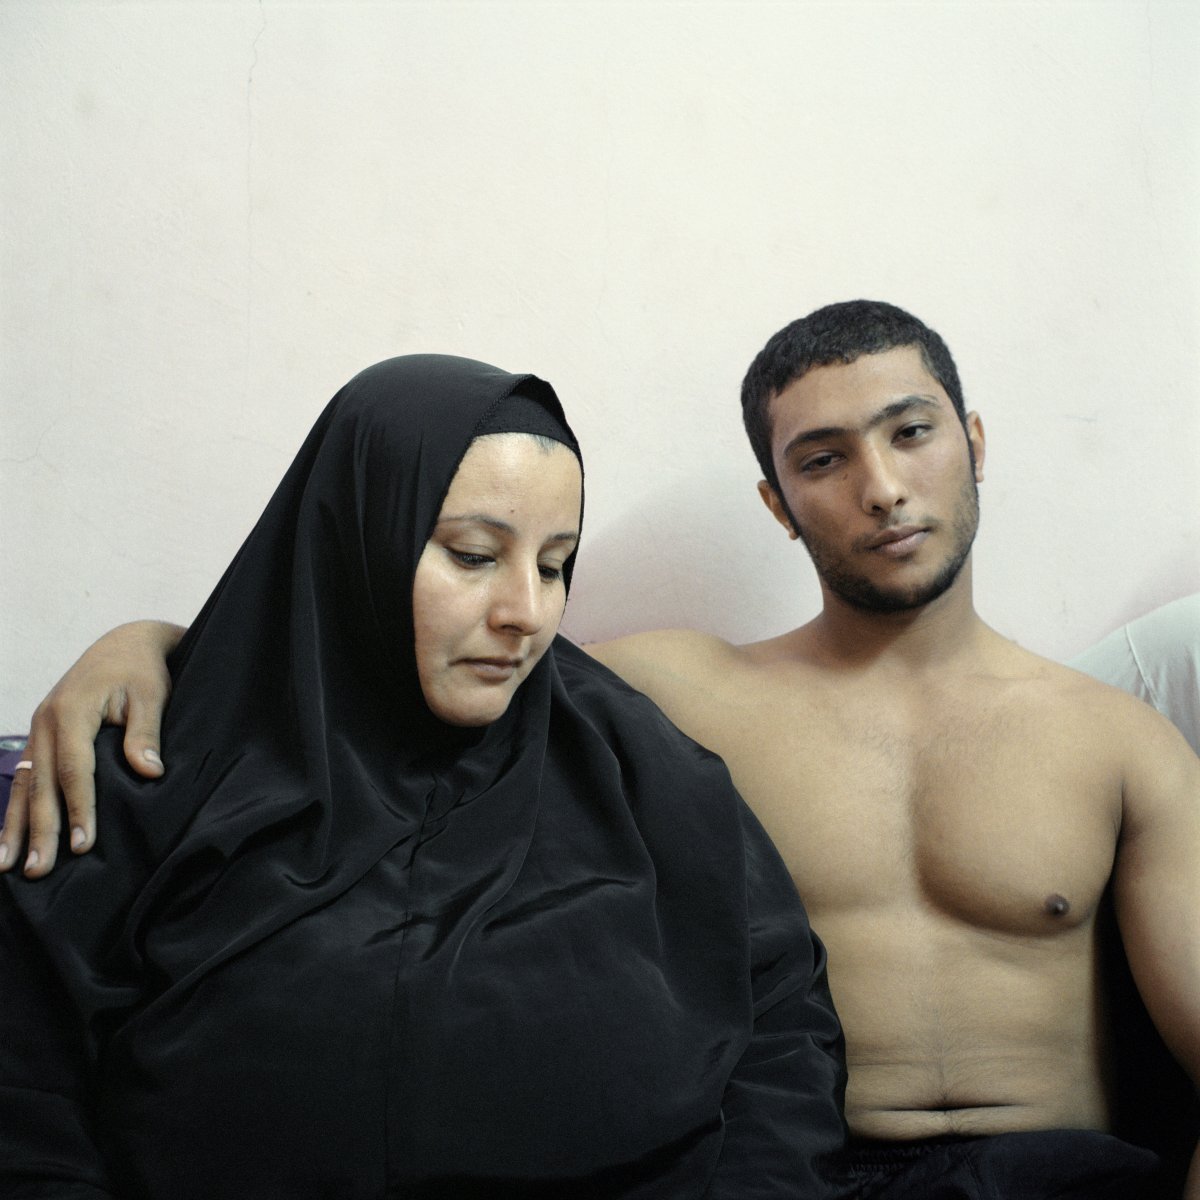 in-the-aftermath-of-the-arab-spring-denis-daileux-went-to-cairo-to-photograph-portraits-of-young-egyptians-with-their-mothers